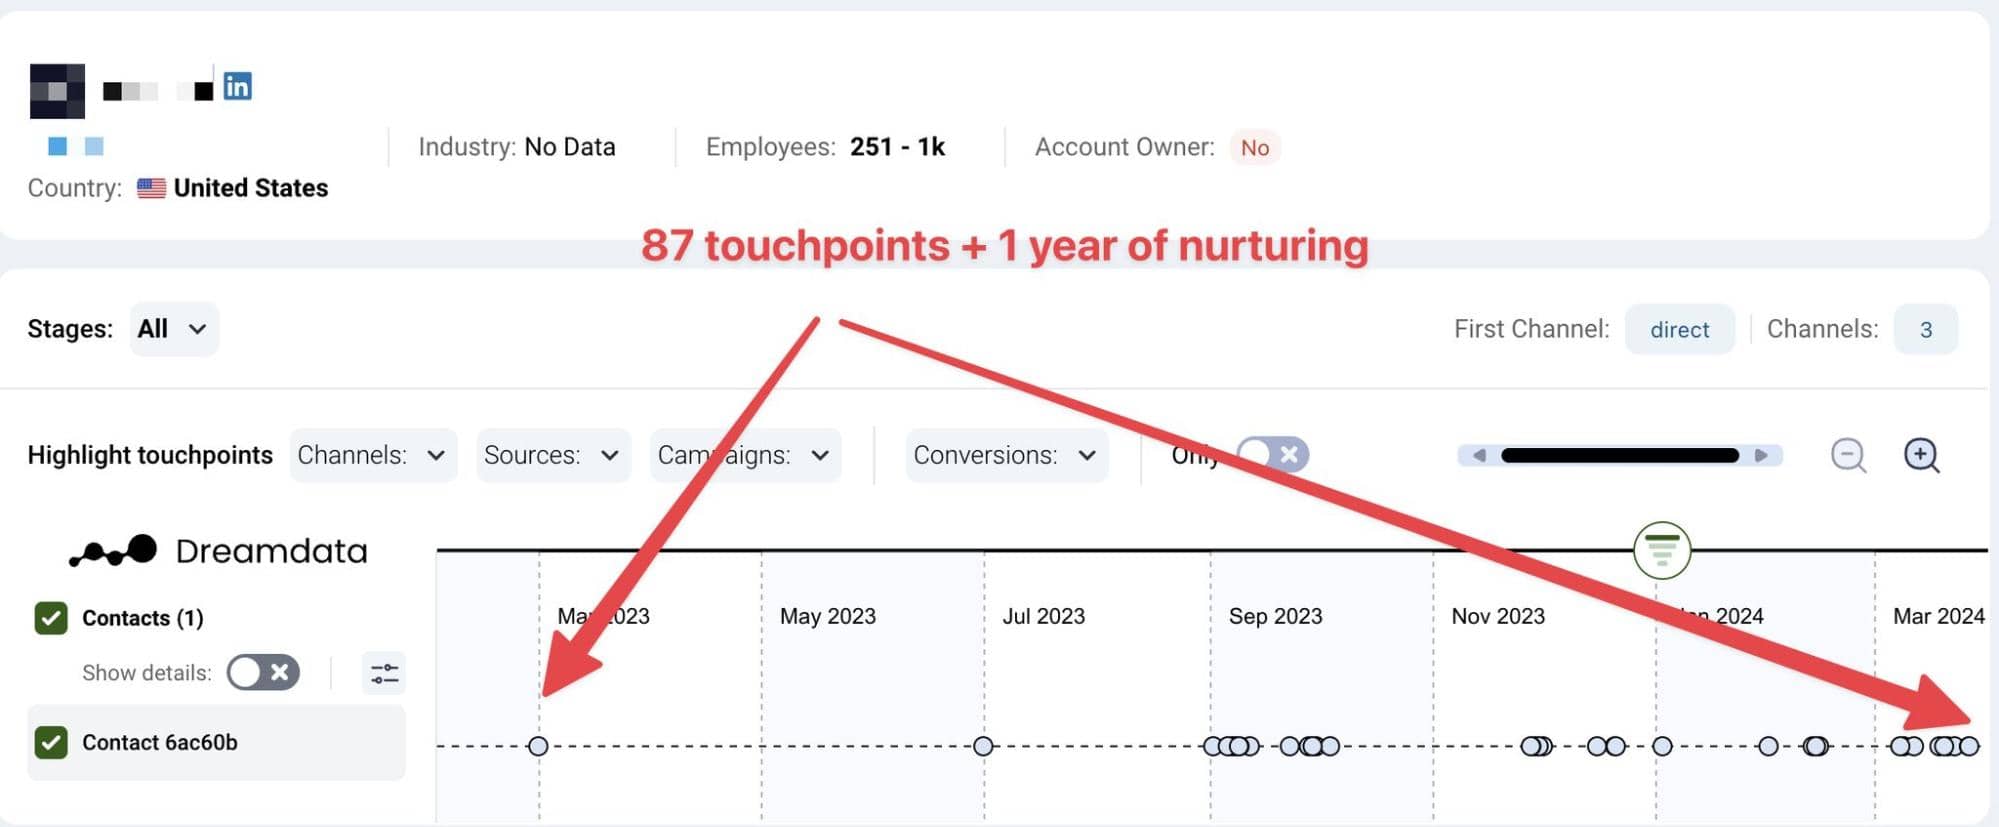 Customer touchpoints in B2B customer journey (87 touchpoints and 1 year to close the sale)